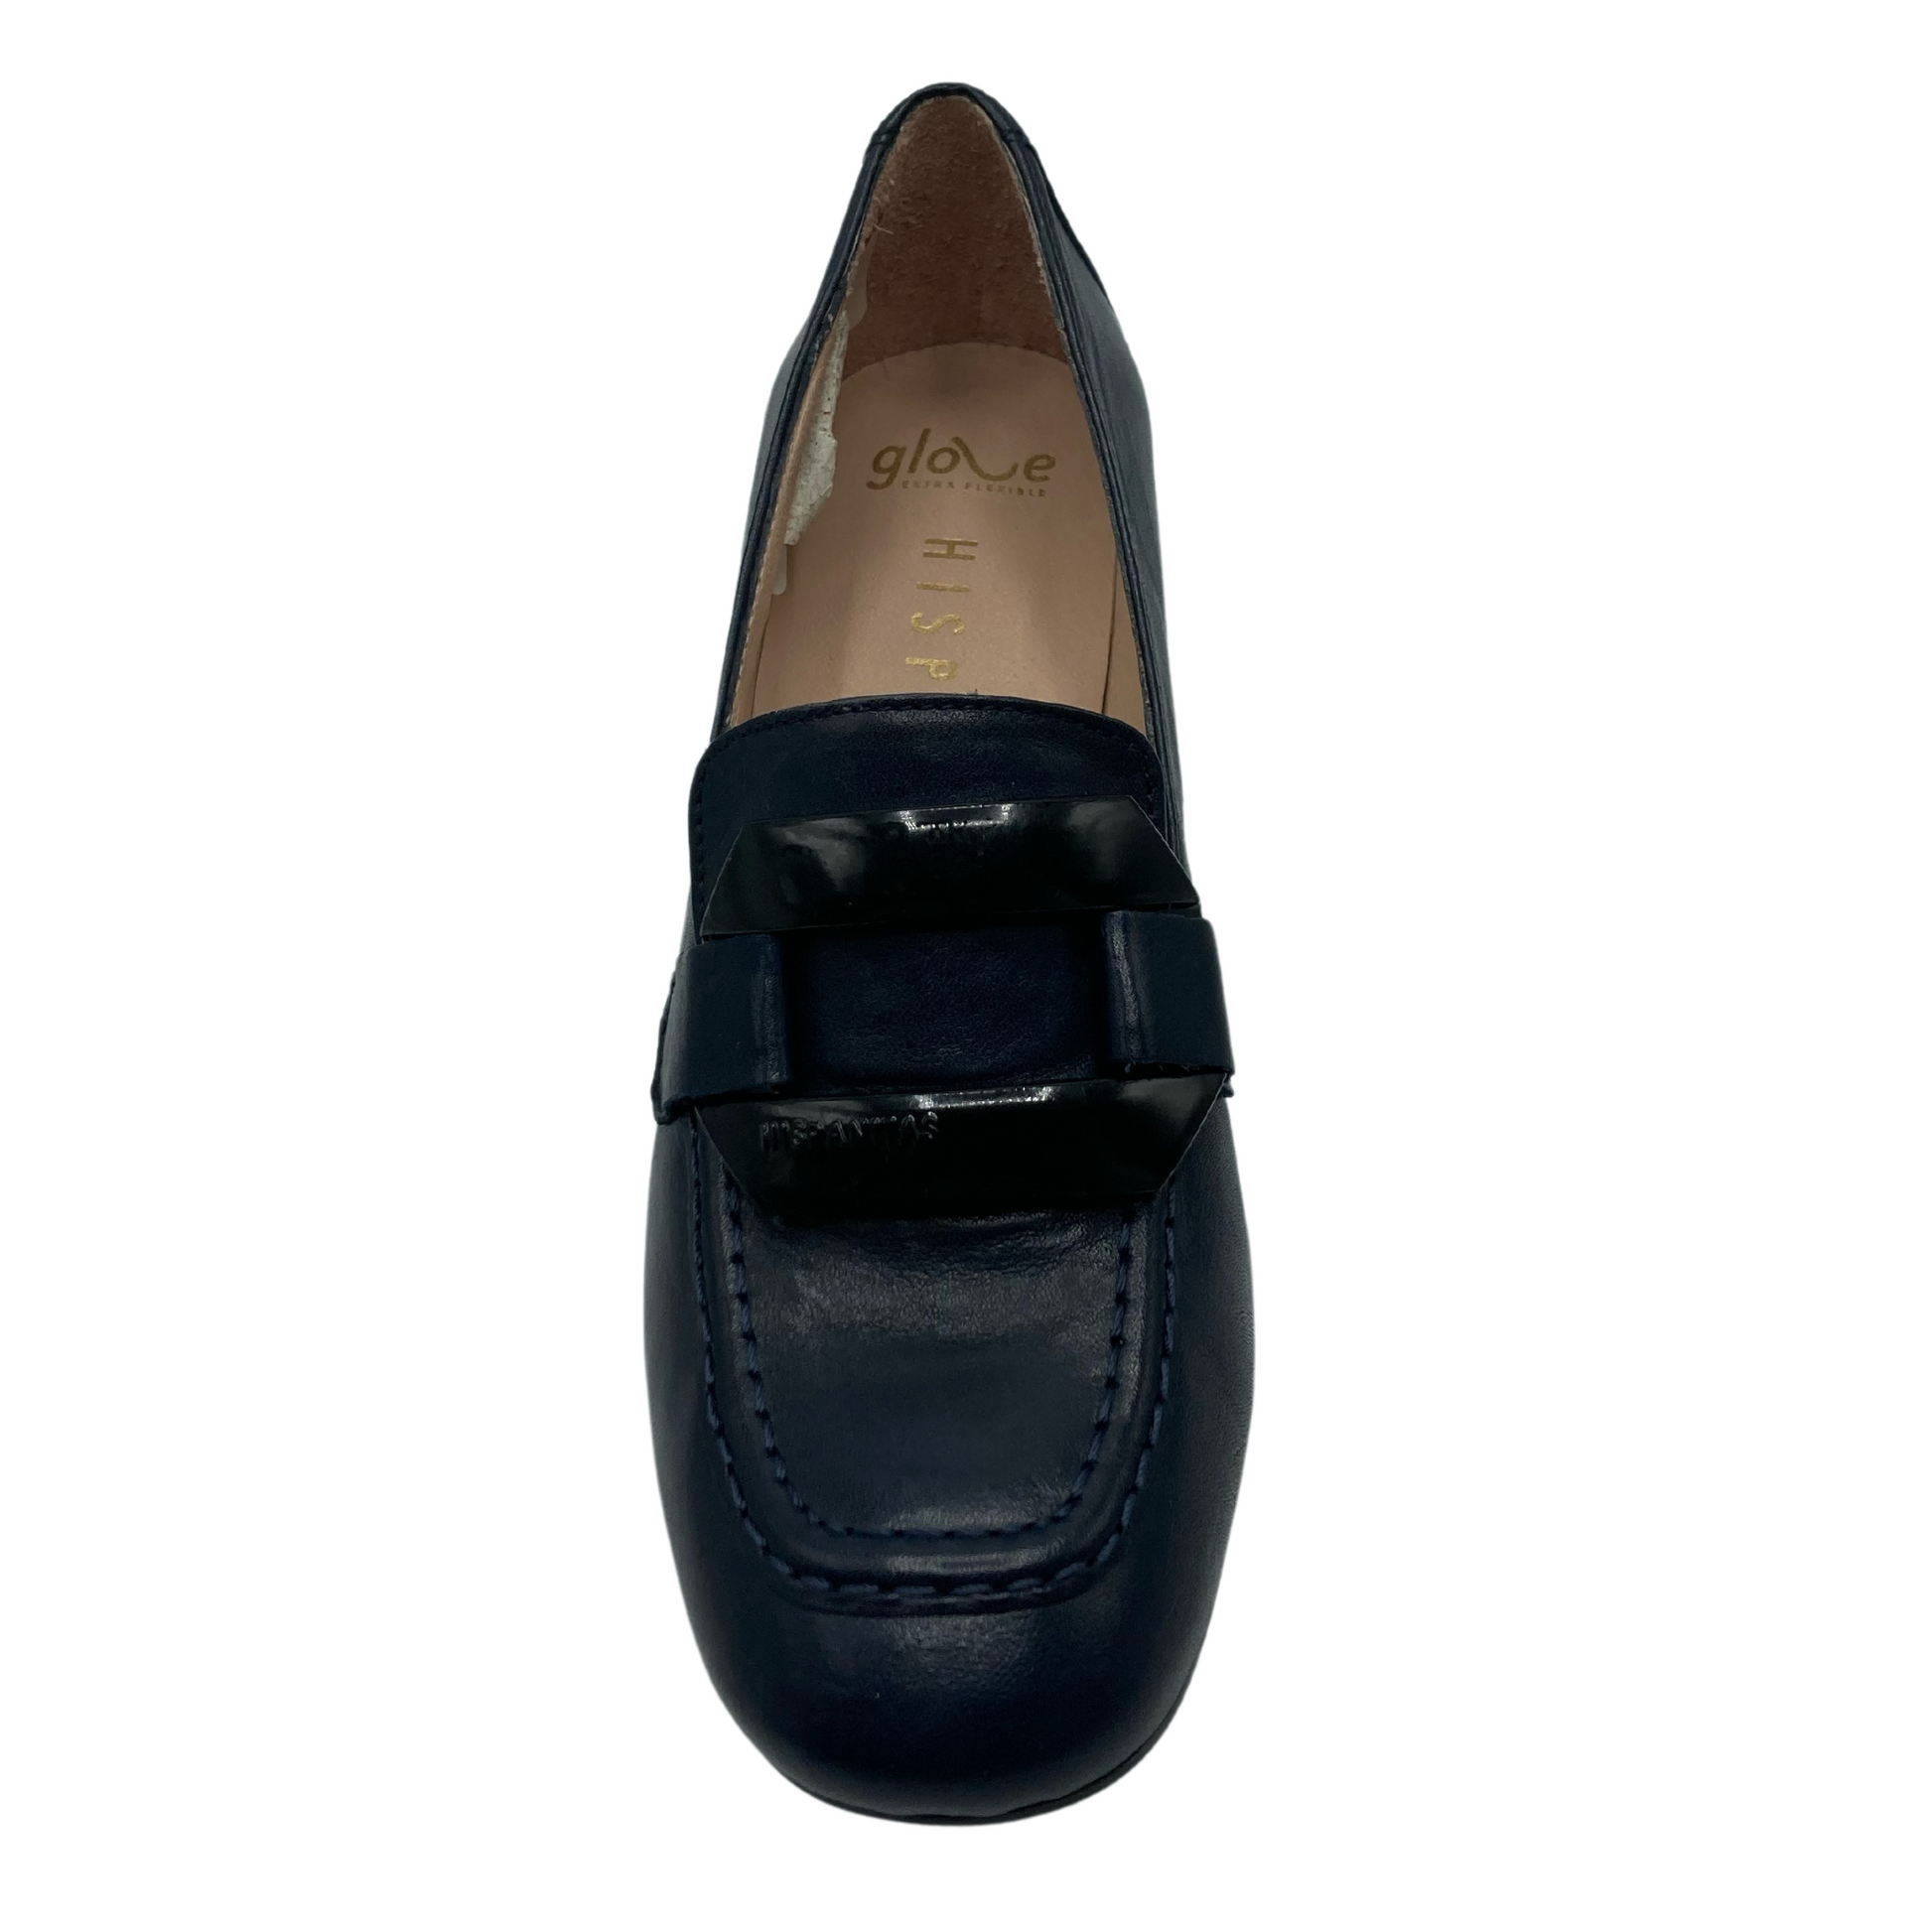 Top view of navy leather loafer with beige leather lining